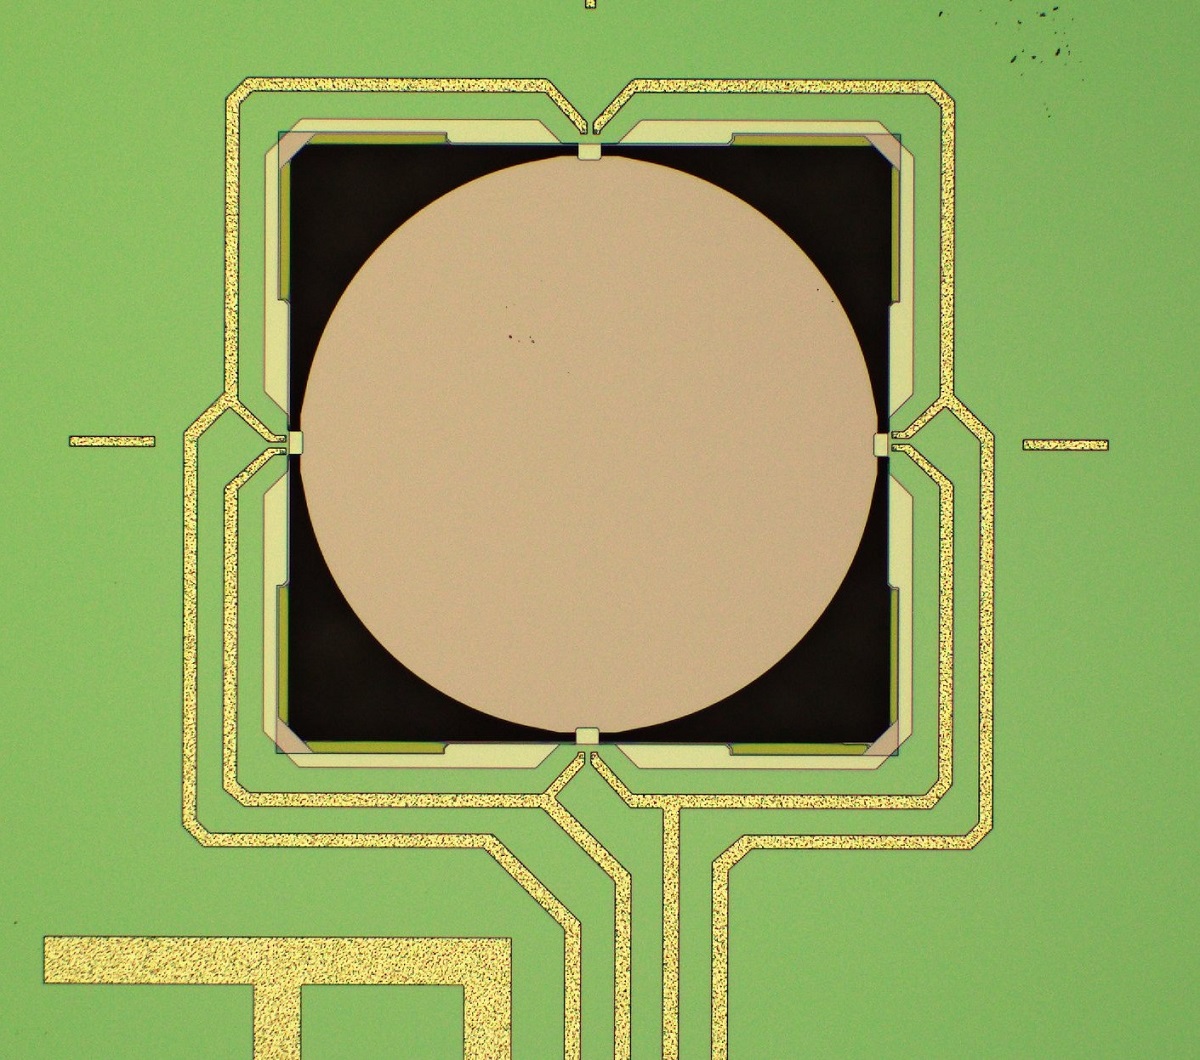 NANOSENSORS Membrane-type Surface-stress Sensors (MSS) type for liquid applications “SD-MSS-1K2GP” – top view of sensor platform. This is the raw sensors platform. It still needs to be coated with a detection layer by the individual researcher in order to become a fully functional sensor.